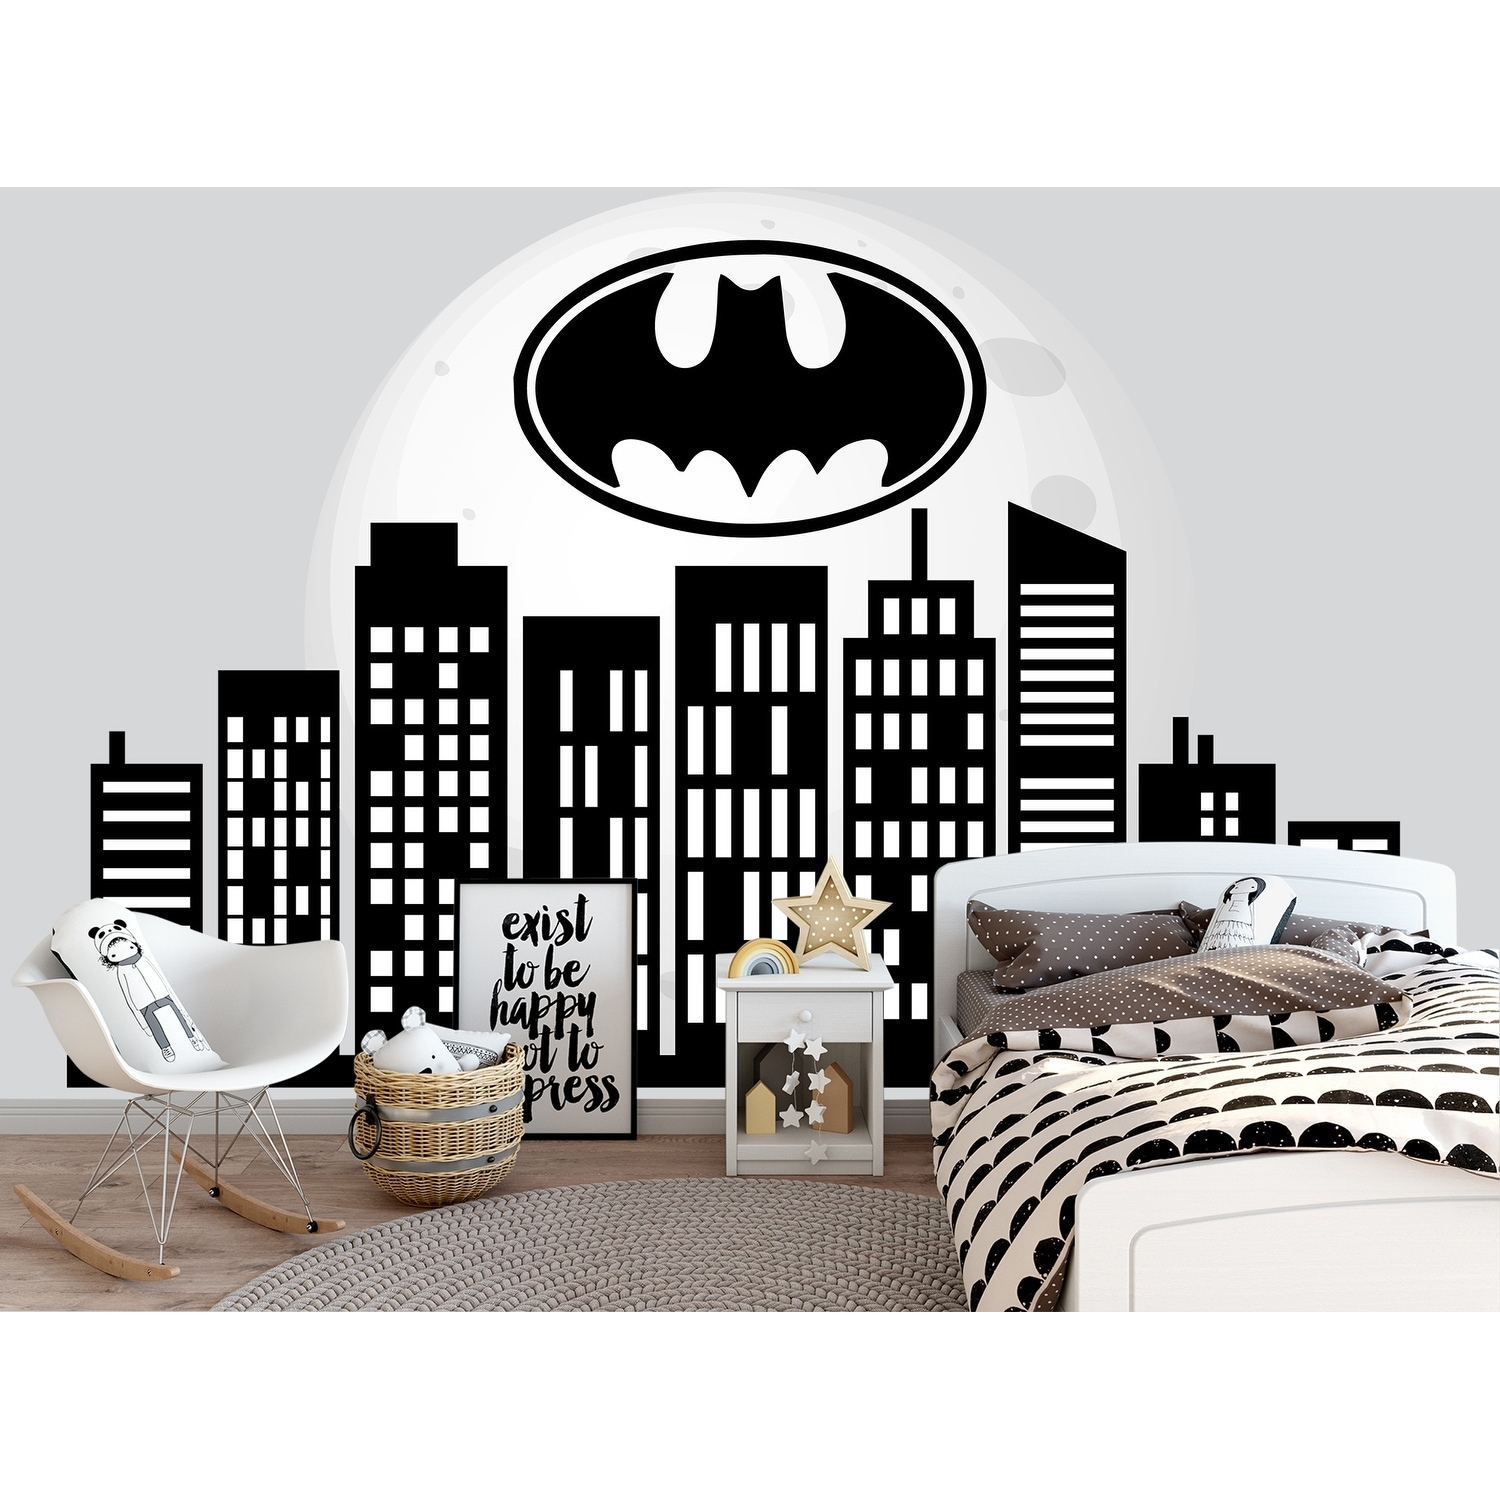 Lampshades Ideal To Match Superheroes Duvet Covers & Superheroes Wall Decals. 